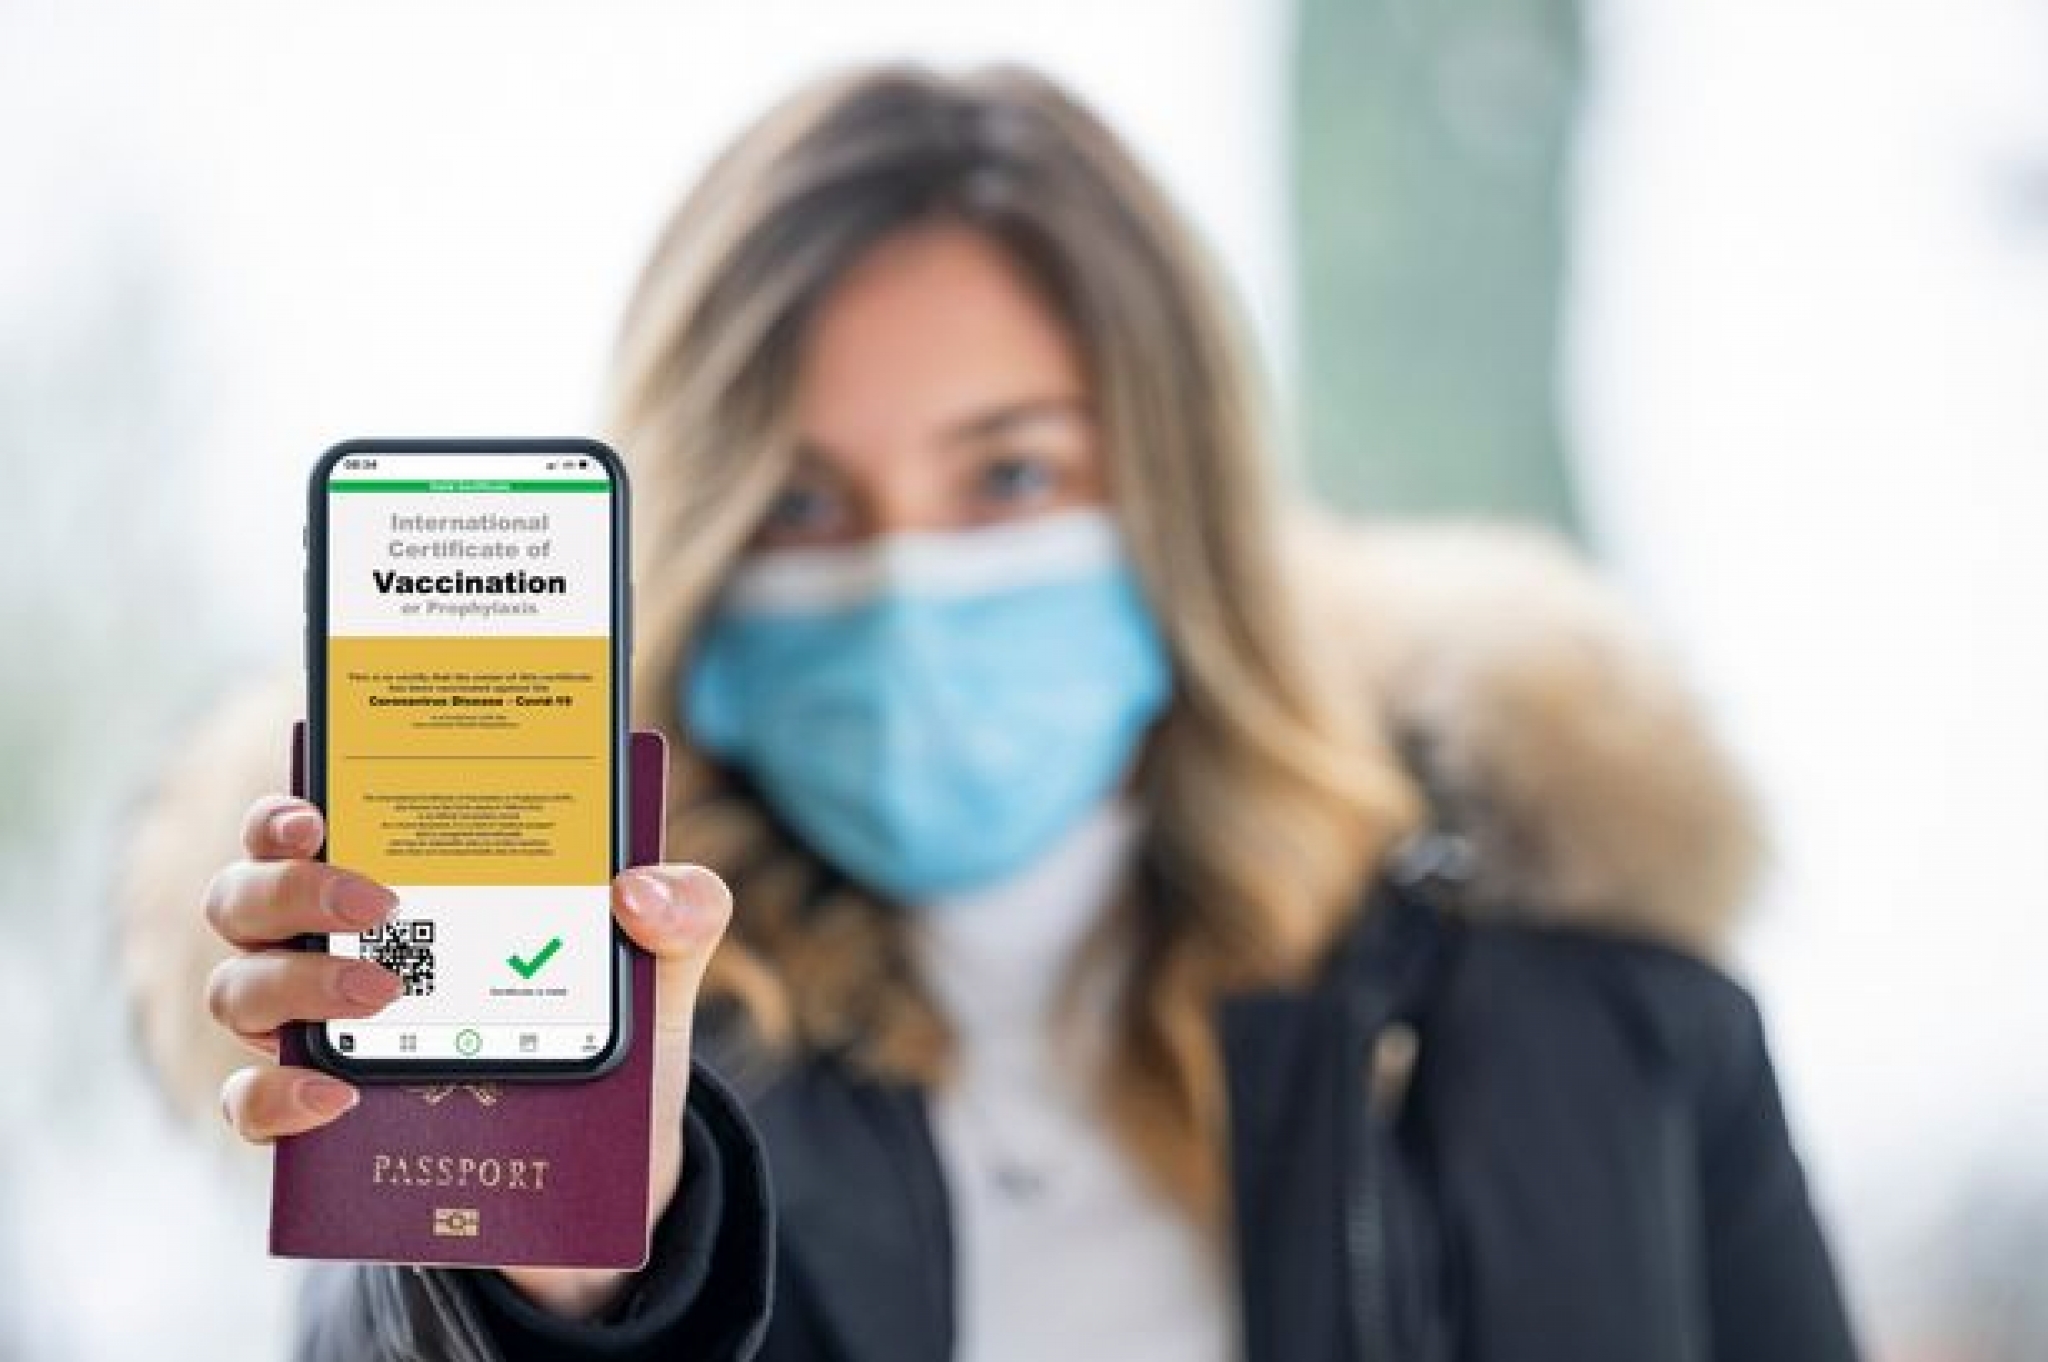 Holidaymakers to use NHS app to prove vaccine status